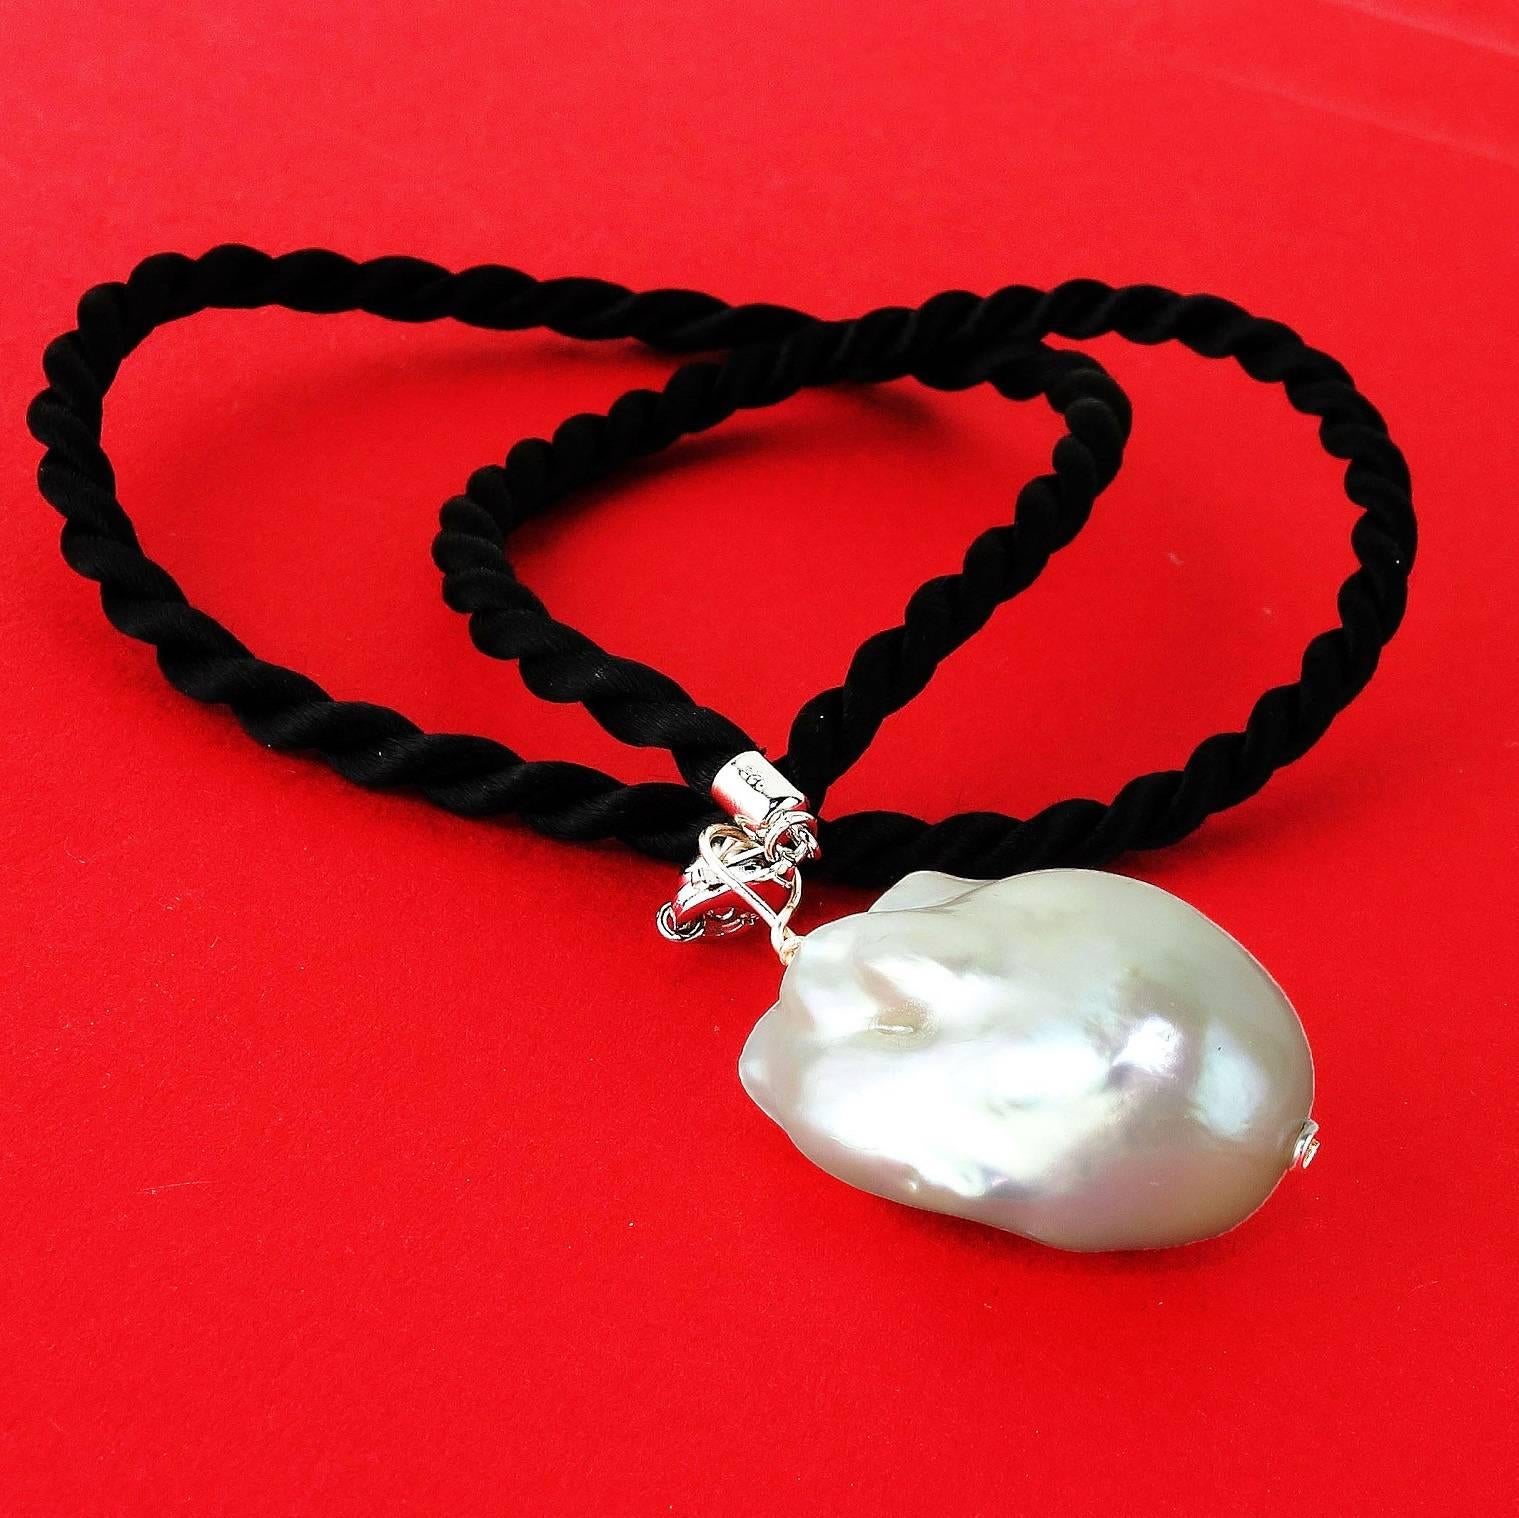 Magnificent one of a kind White Baroque Pearl Pendant on a black cord. The pearl is beautiful from all angles. This can be worn on the cord or a silver choker or other device. The black cord is 16.25 inches and closes with a lobster claw clasp. The